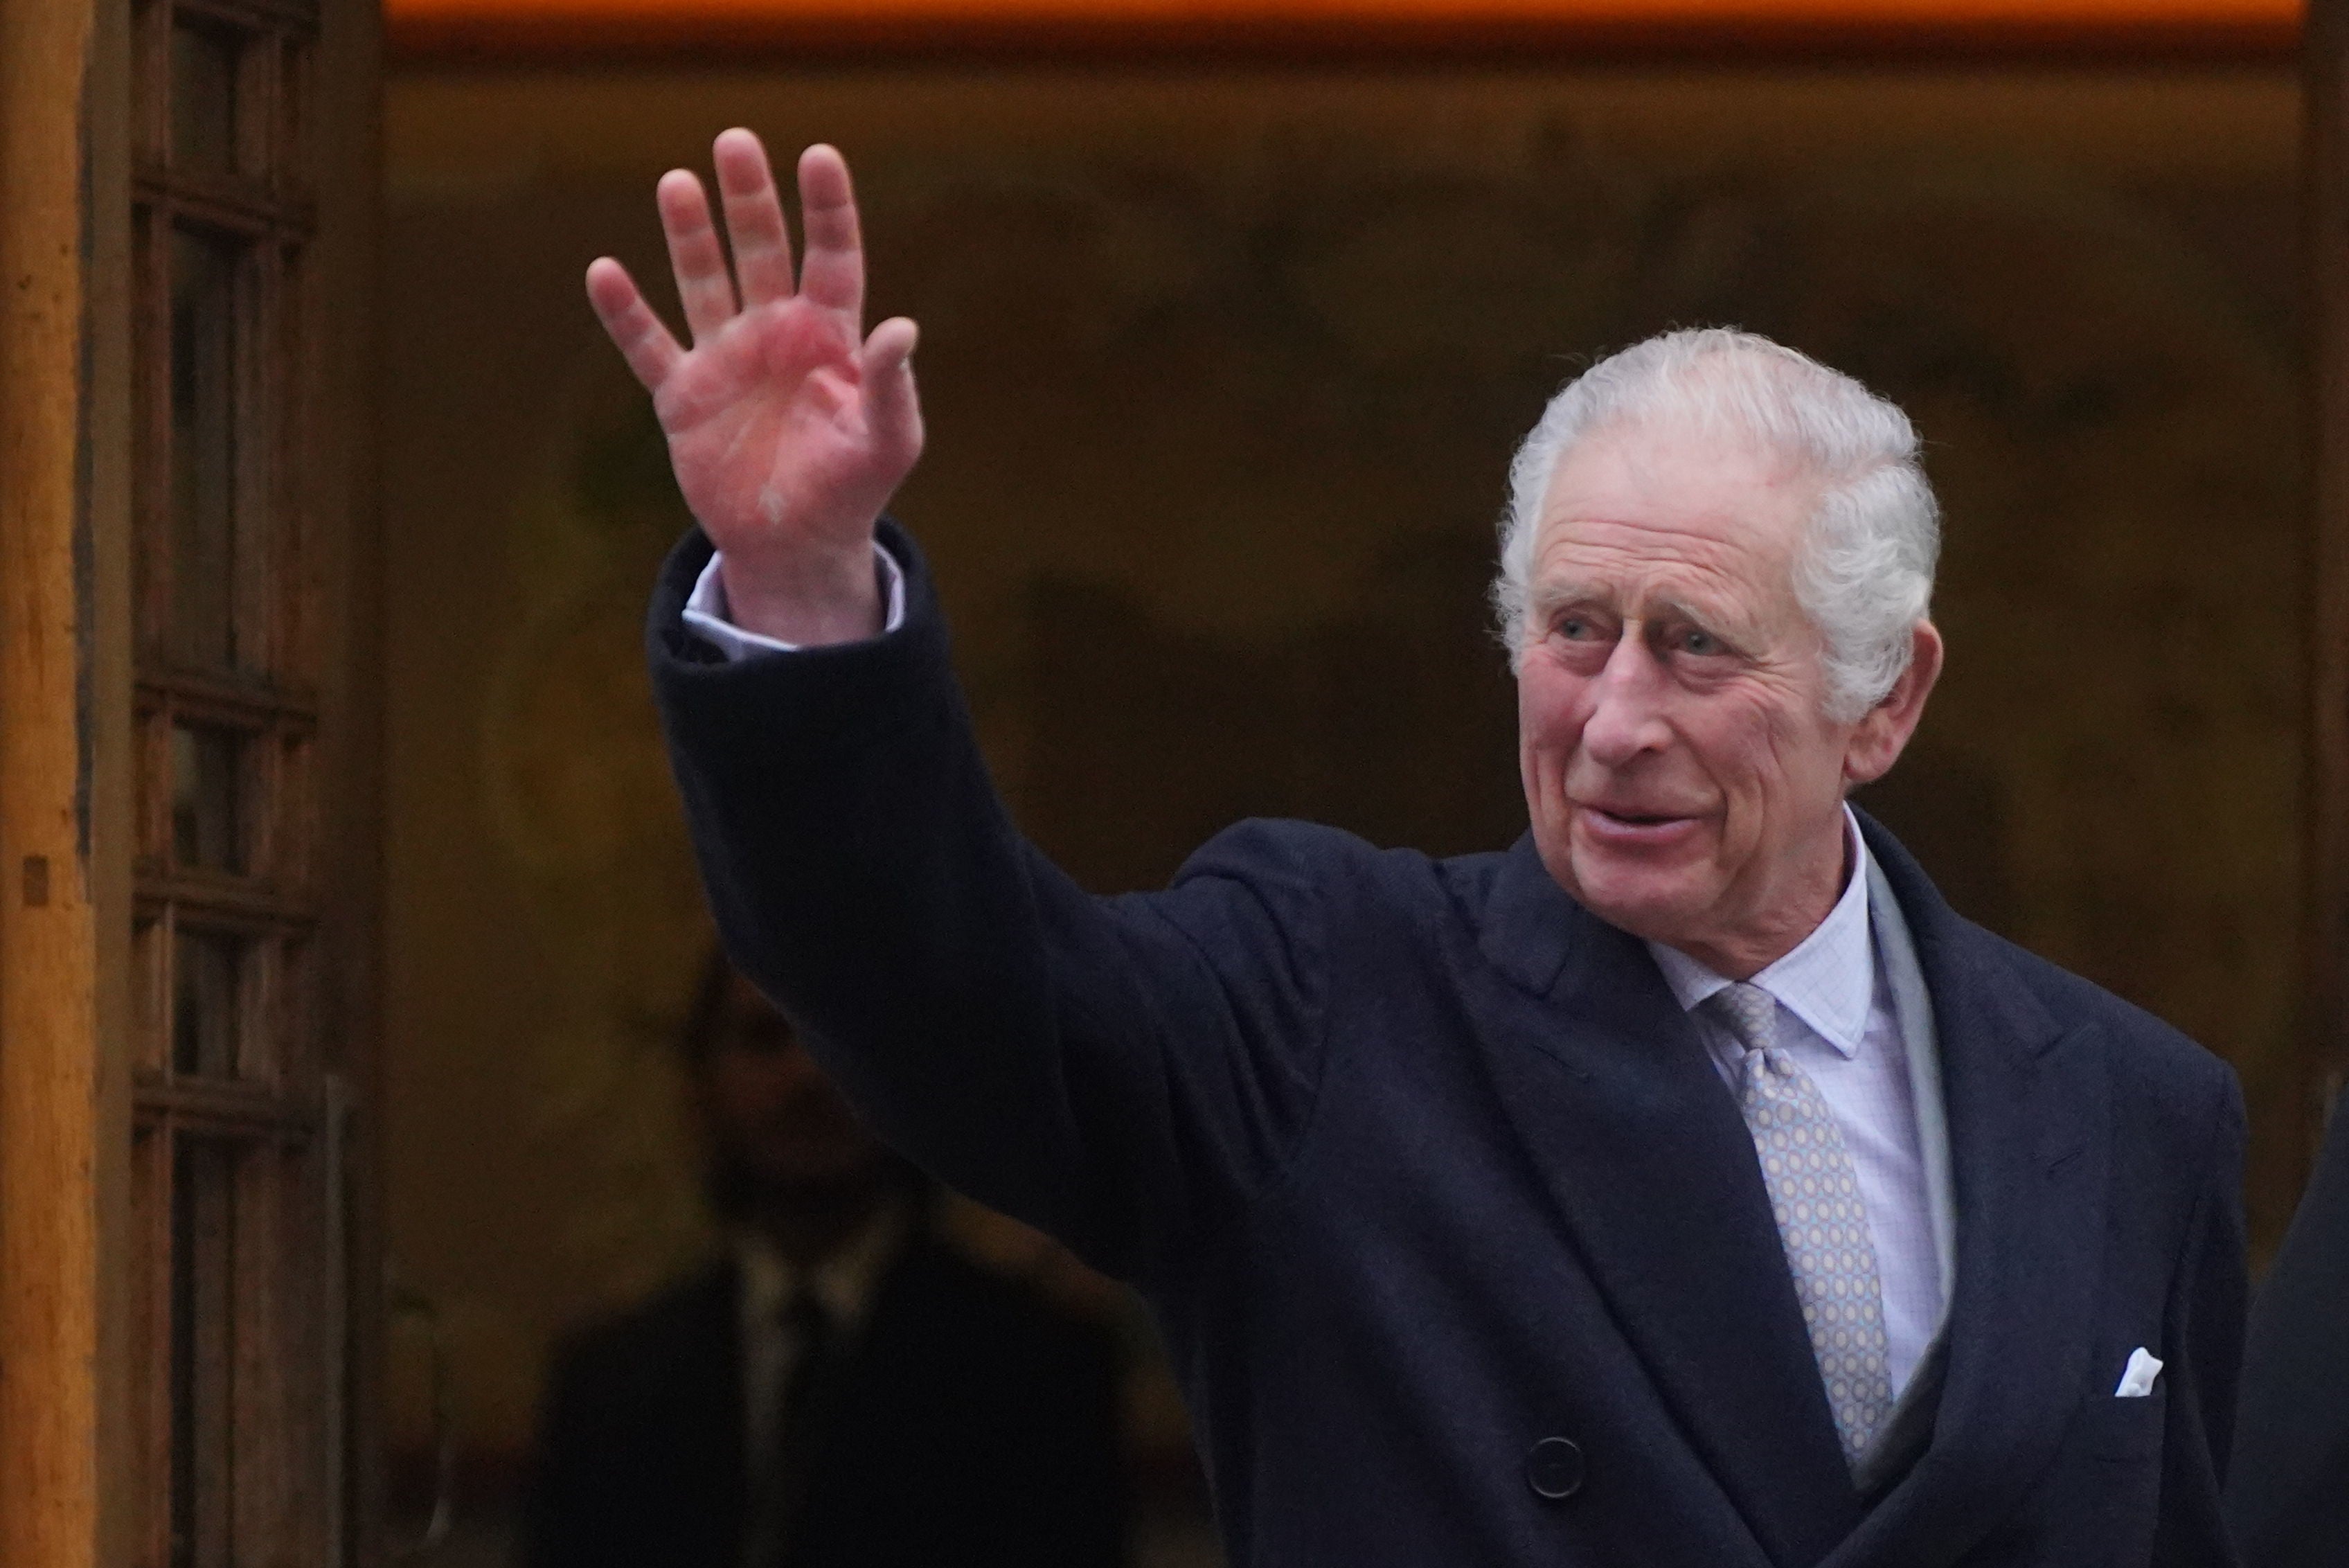 King Charles has been diagnosed with cancer and will be stepping back from his royal duties